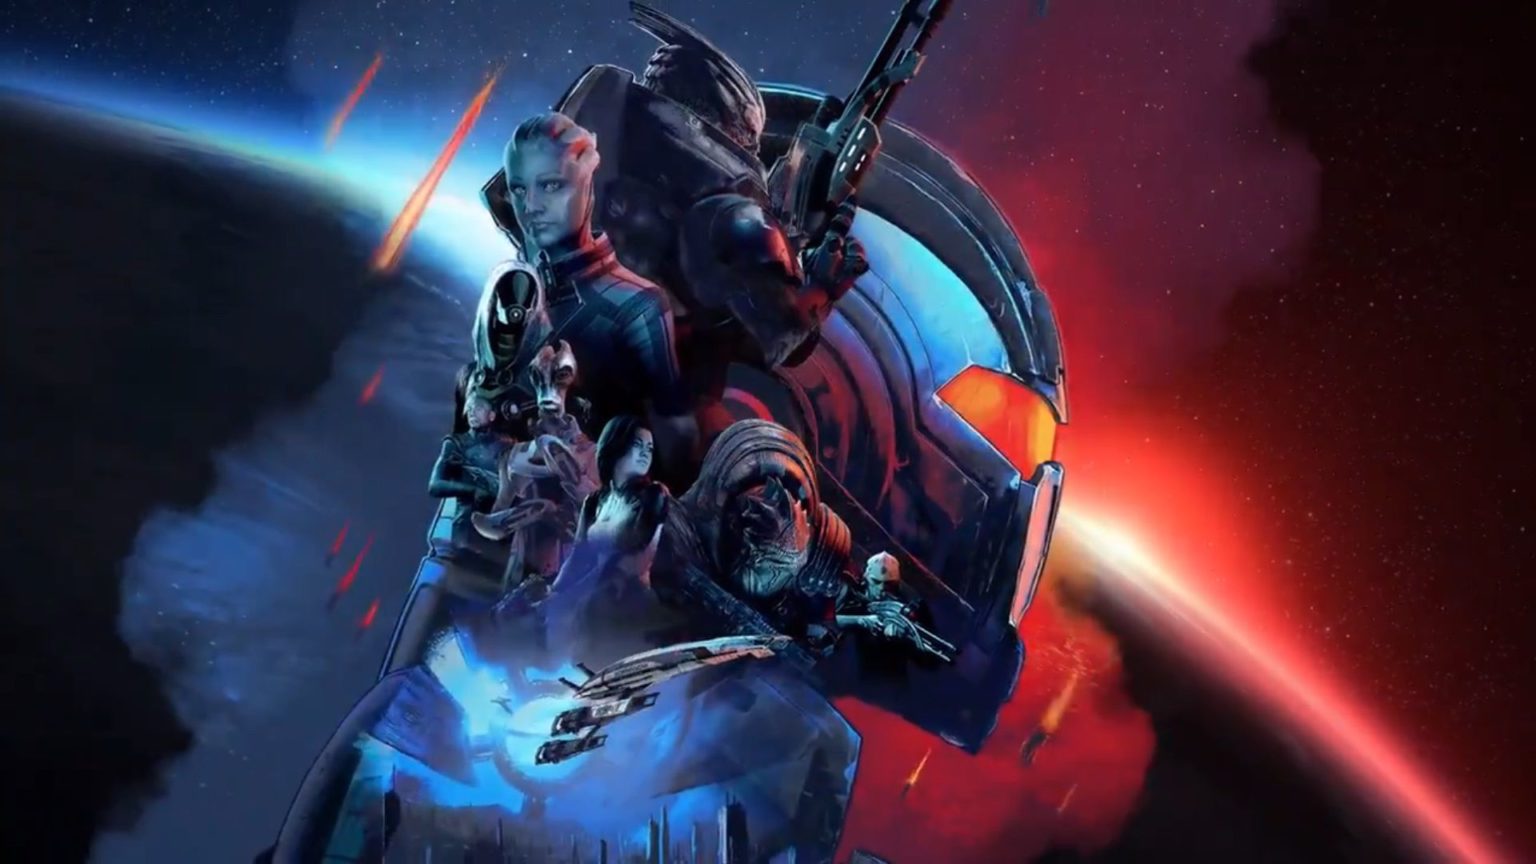 download the new version for android Mass Effect™ издание Legendary